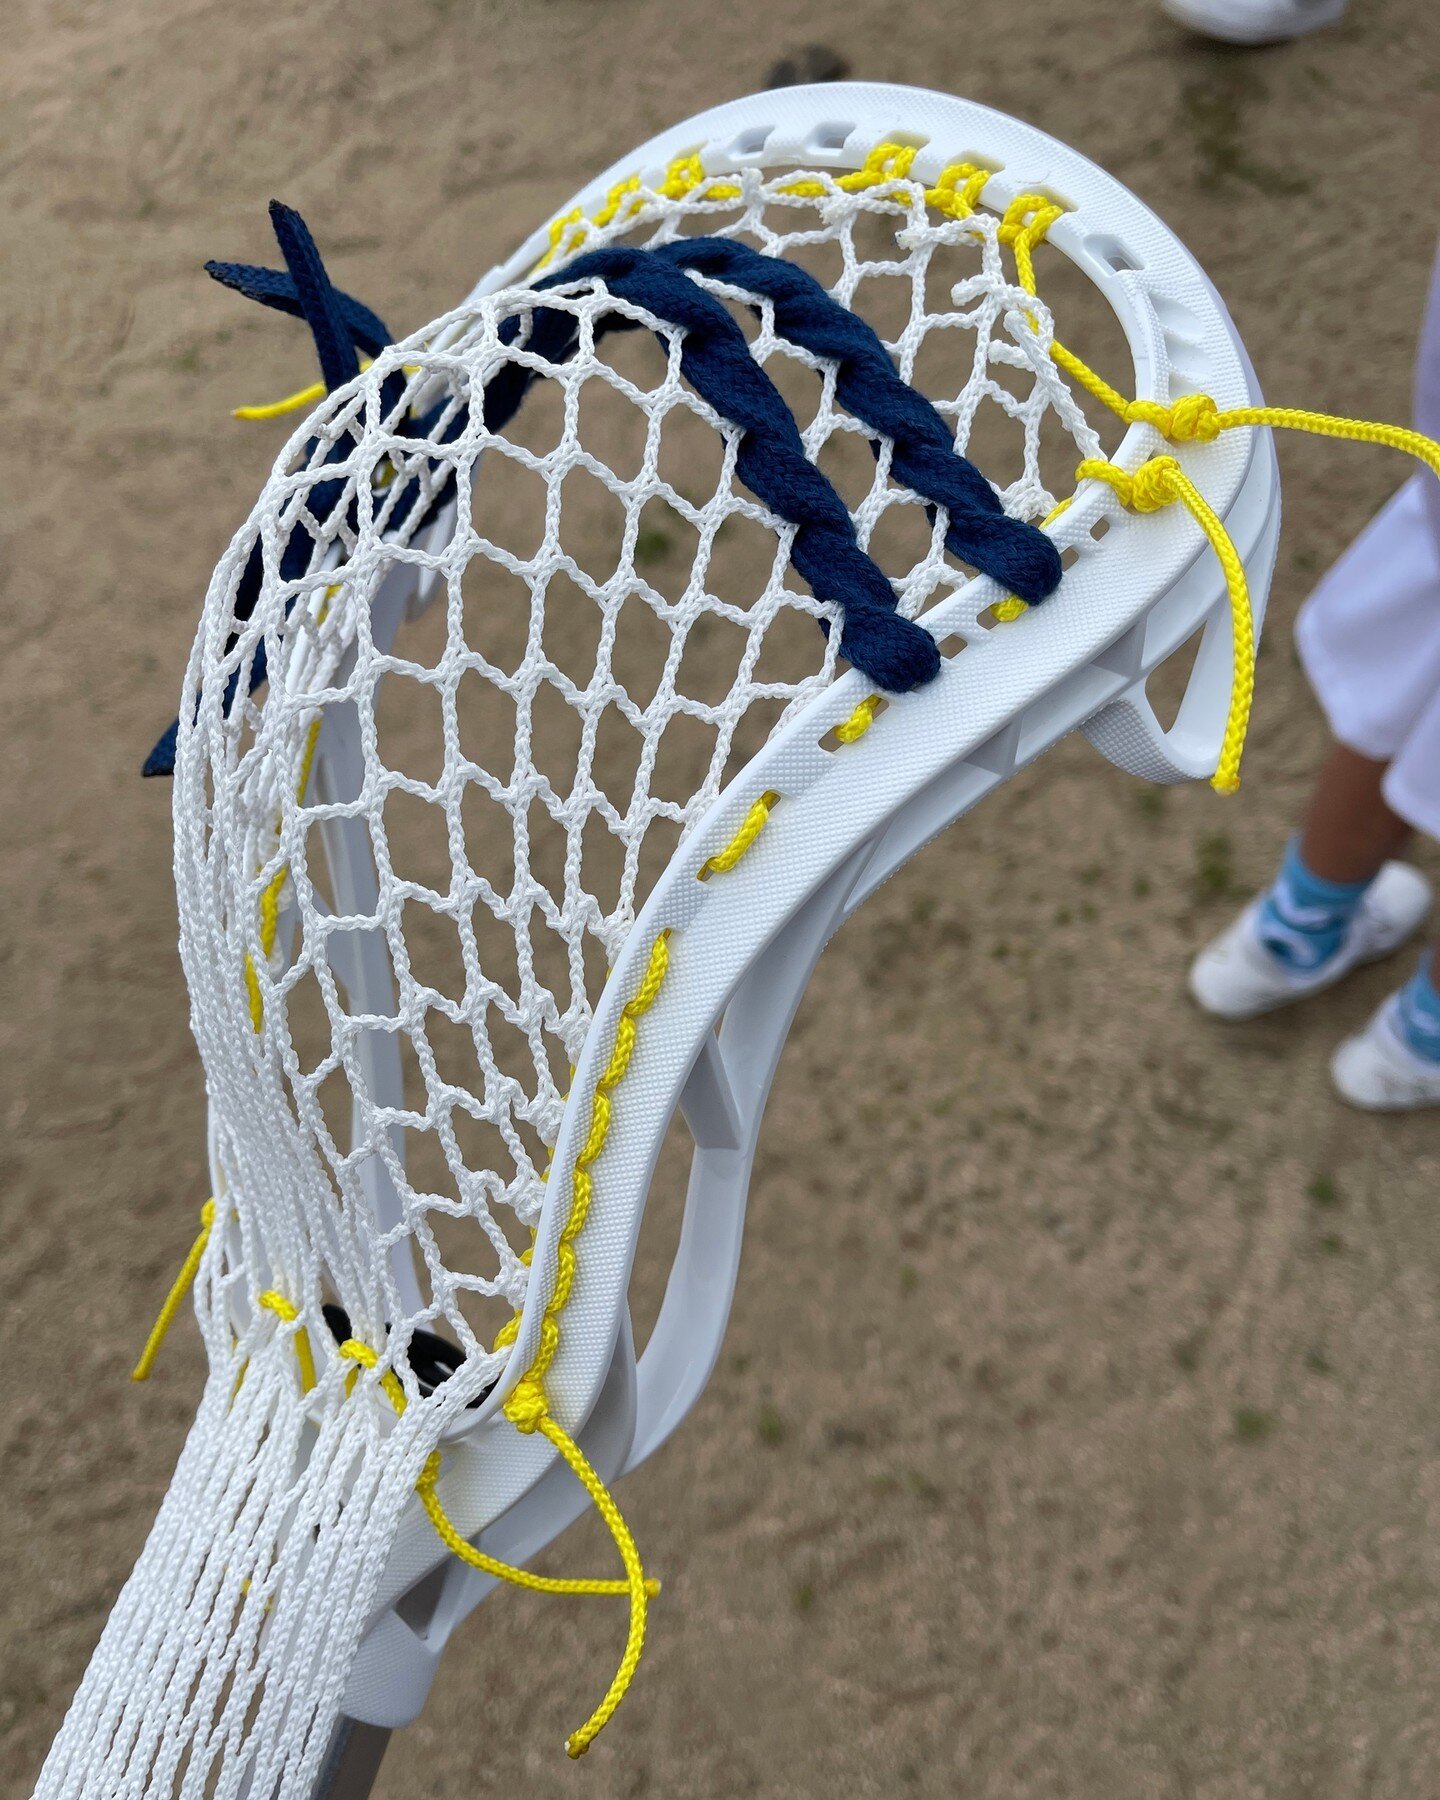 Another @gaitlaxofficial D head tied up with @stringking Type 4s. I WANT one 😫

#nsalacrosse #nsalax #nsastrung #customstrung #norcallax #bayarealax #lax #lacrosse #laxstick #lacrossestick  #lacrosselife #laxislife #laxhead  #lacrosseplayer #lacross